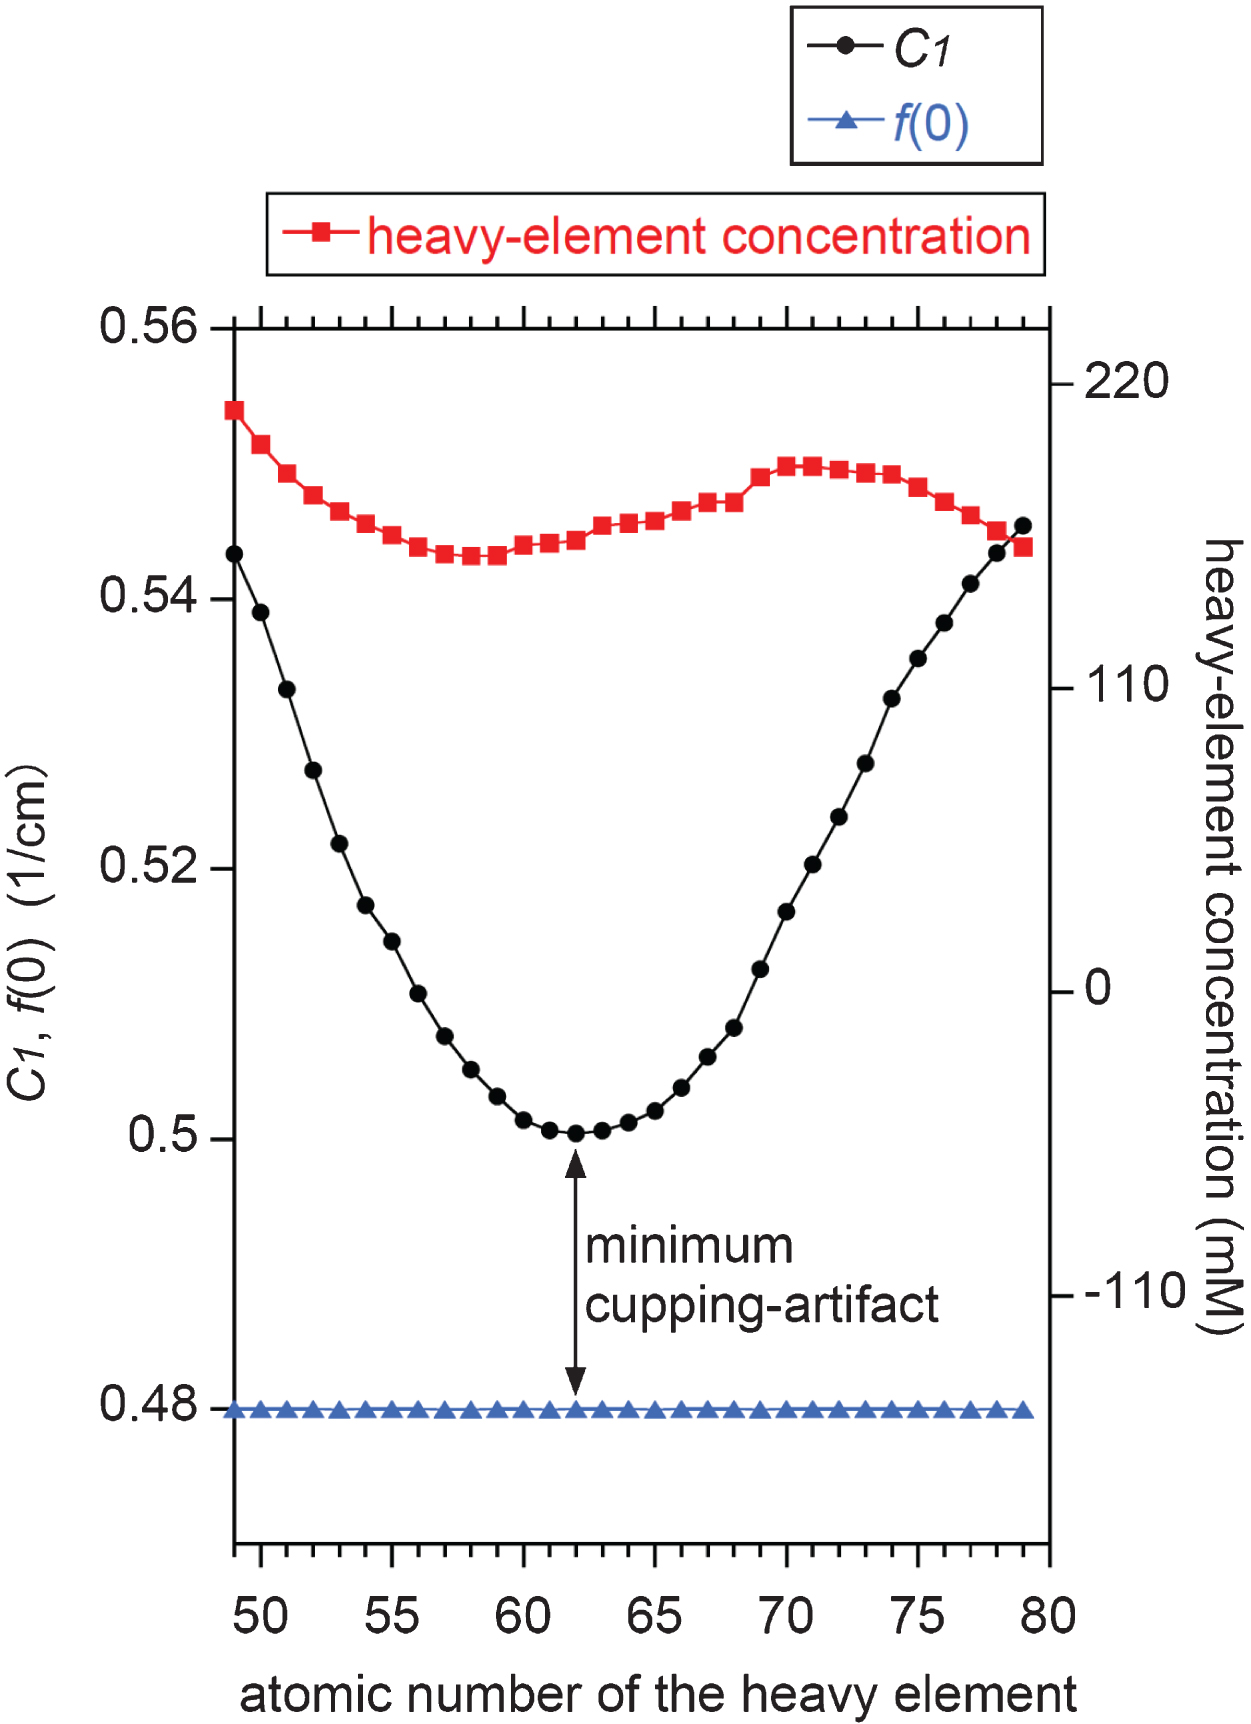 Dependence of C1 value on the atomic number of the heavy element suspended in the water sample for a fixed f (0) value of 0.48 1/cm. The corresponding molar concentration of the heavy element is also plotted. Note that samarium (atomic number, 62) yields the minimum cupping artifact of C1 – f (0) ≈ 0.02 1/cm, for which the corresponding LAC spectrum is shown in Fig. 2a.